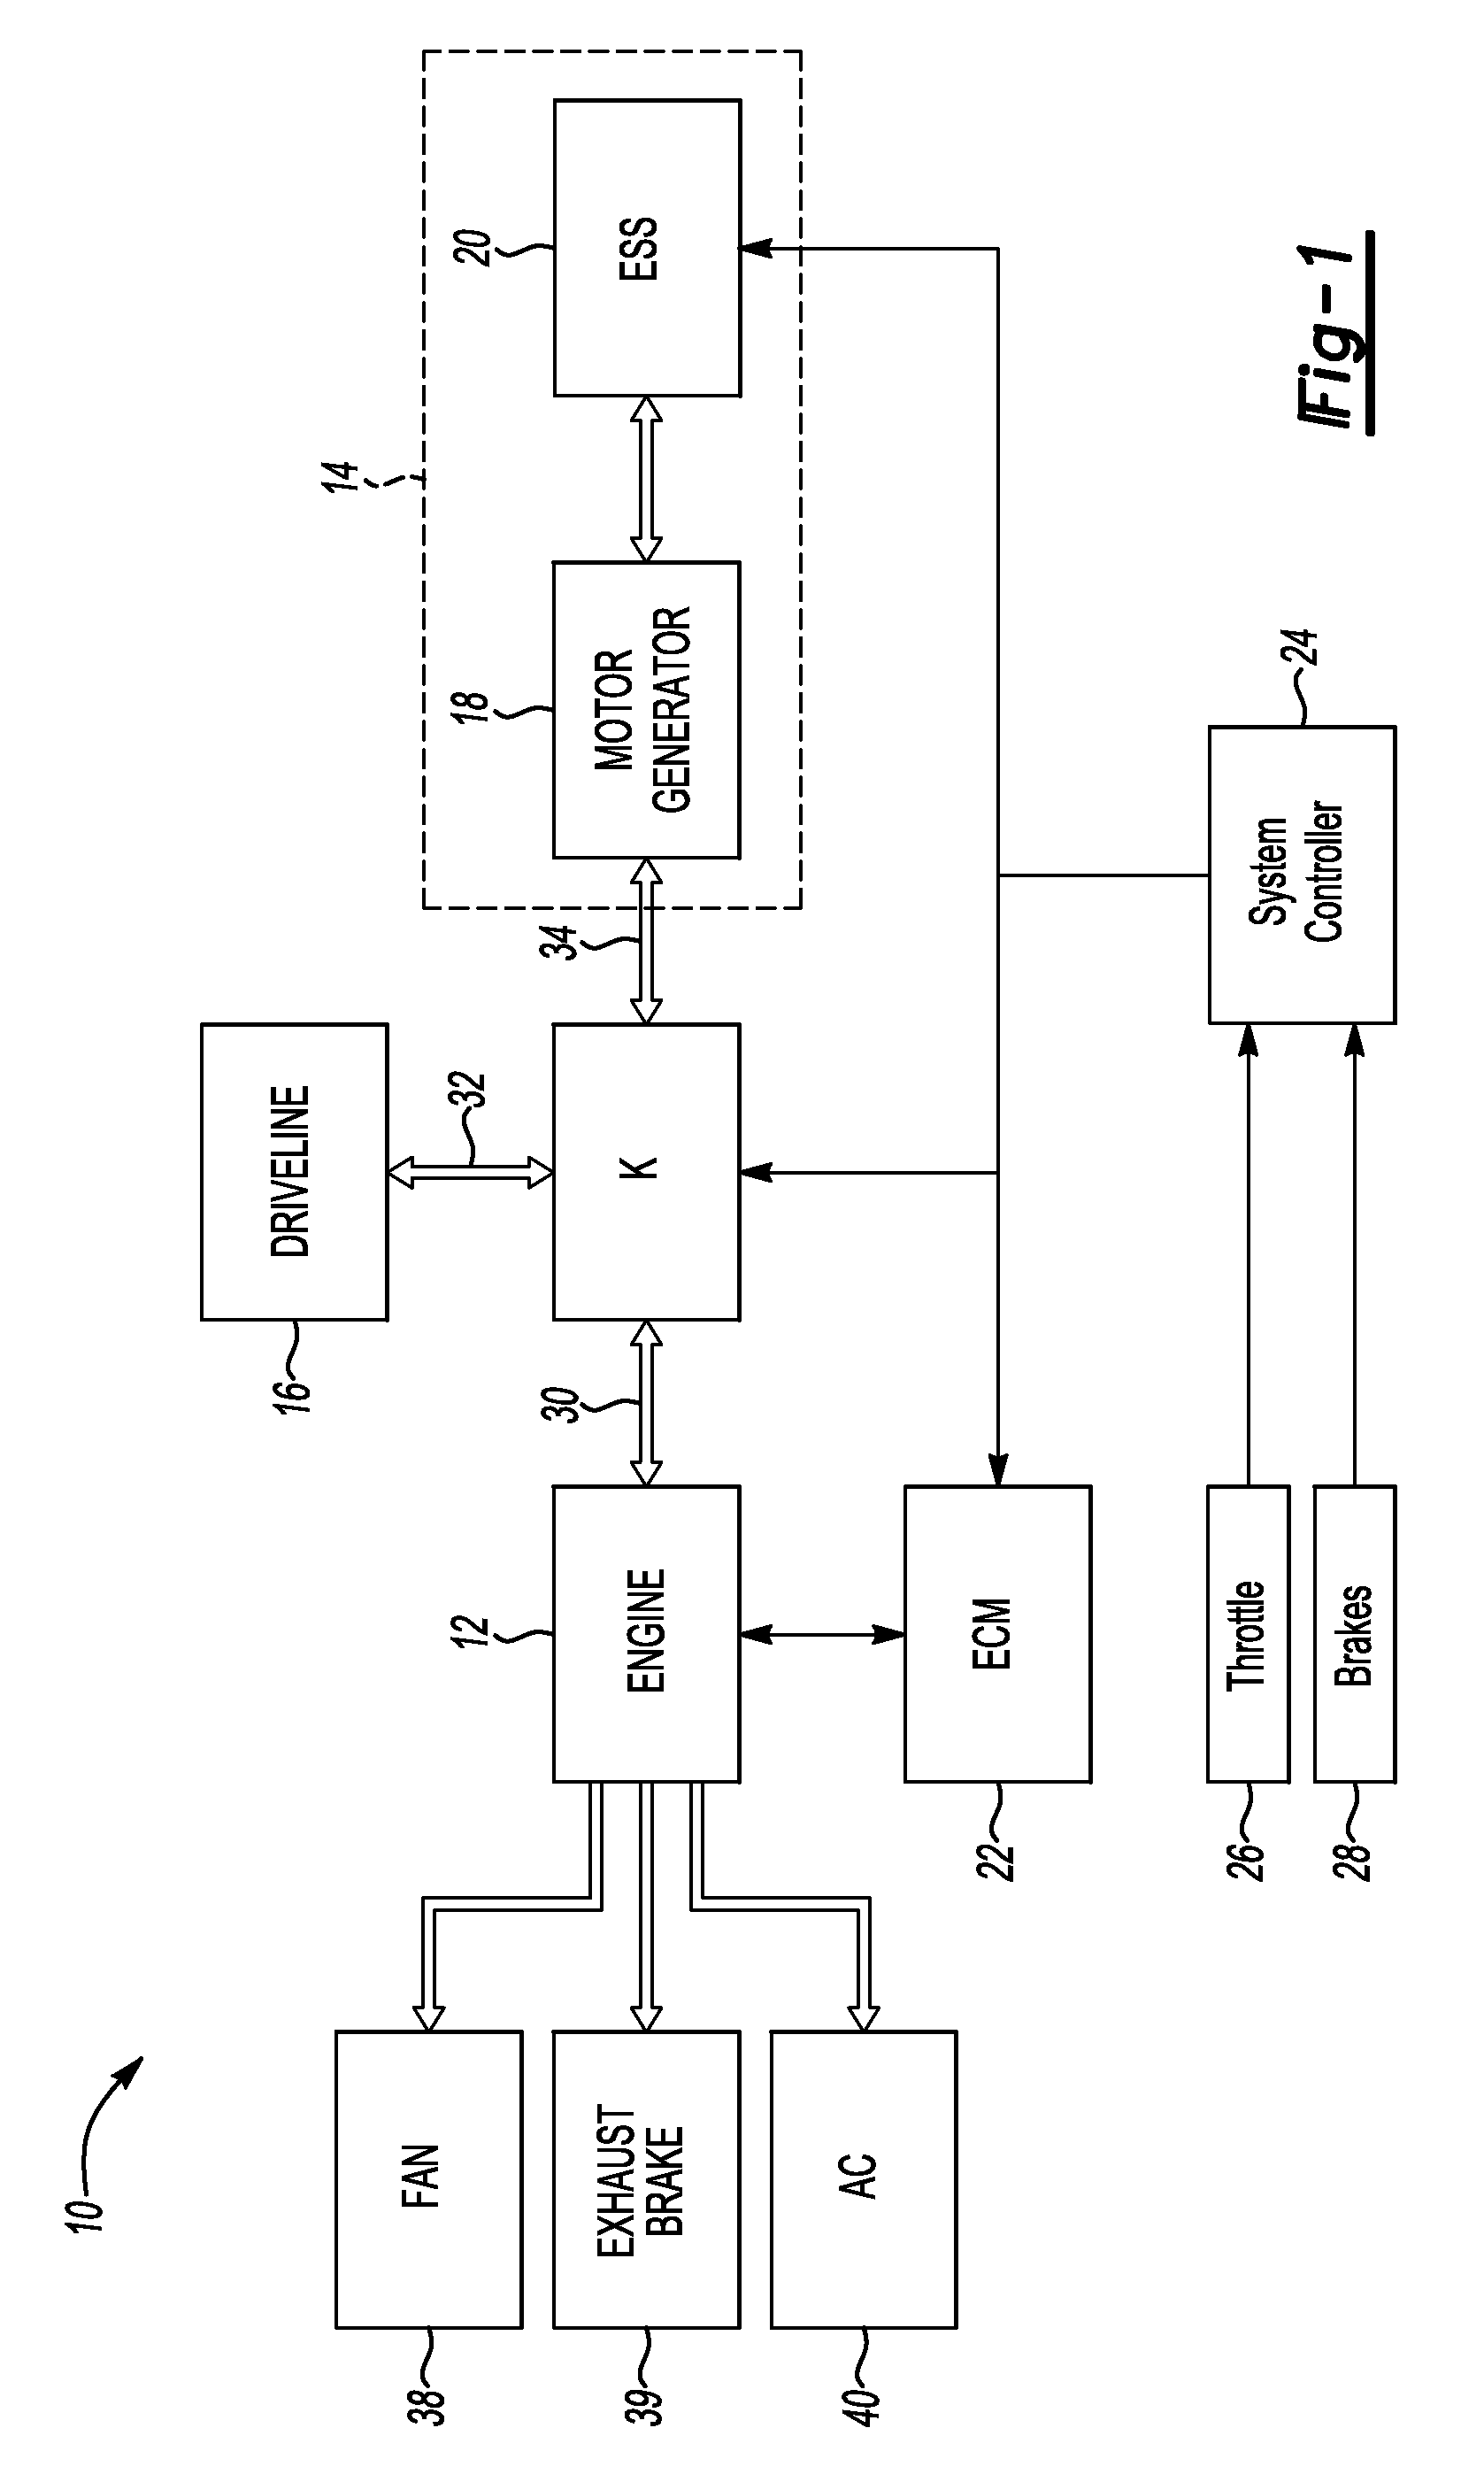 Method of controlling brake power for a vehicle with an electrically variable transmission